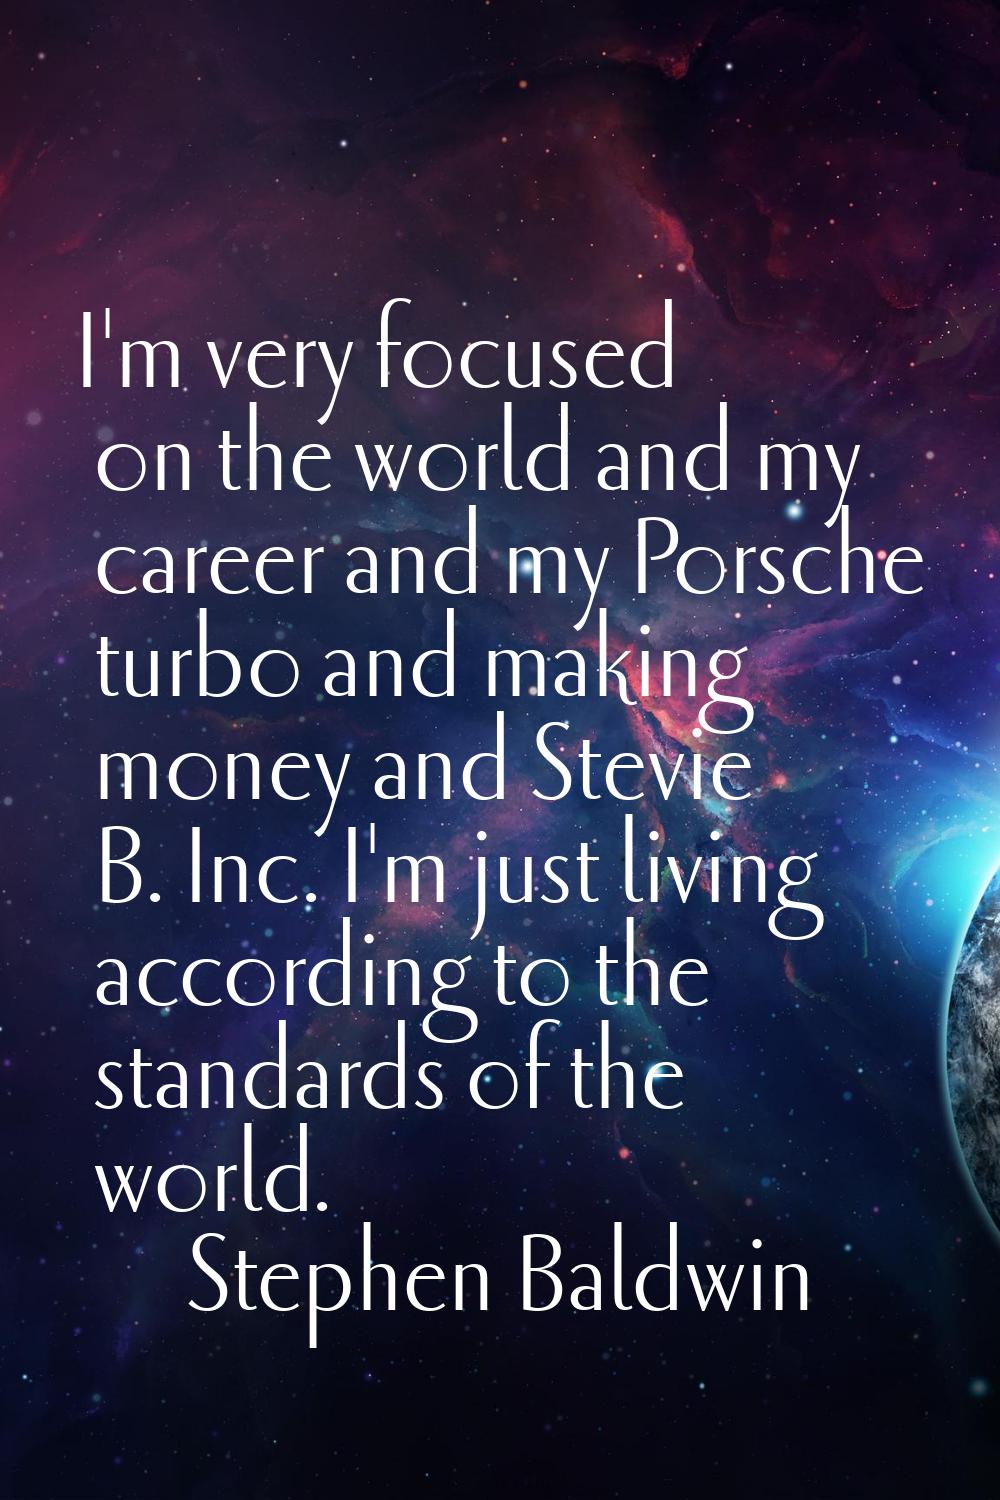 I'm very focused on the world and my career and my Porsche turbo and making money and Stevie B. Inc